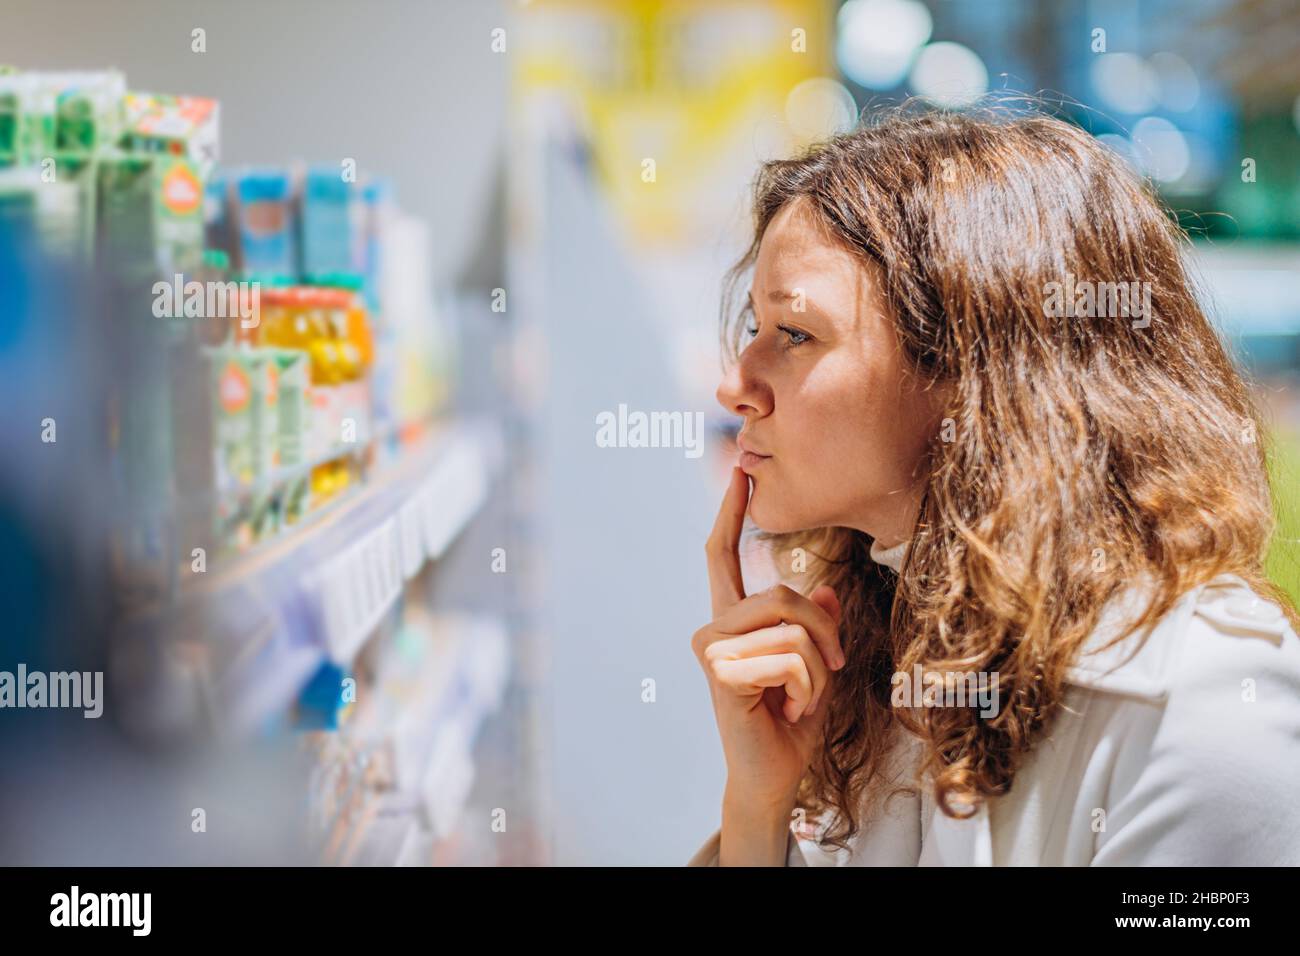 young woman mother reads the composition of children's food, examines the ingredients on juices in the supermarket, a portrait of an attentive shopper Stock Photo